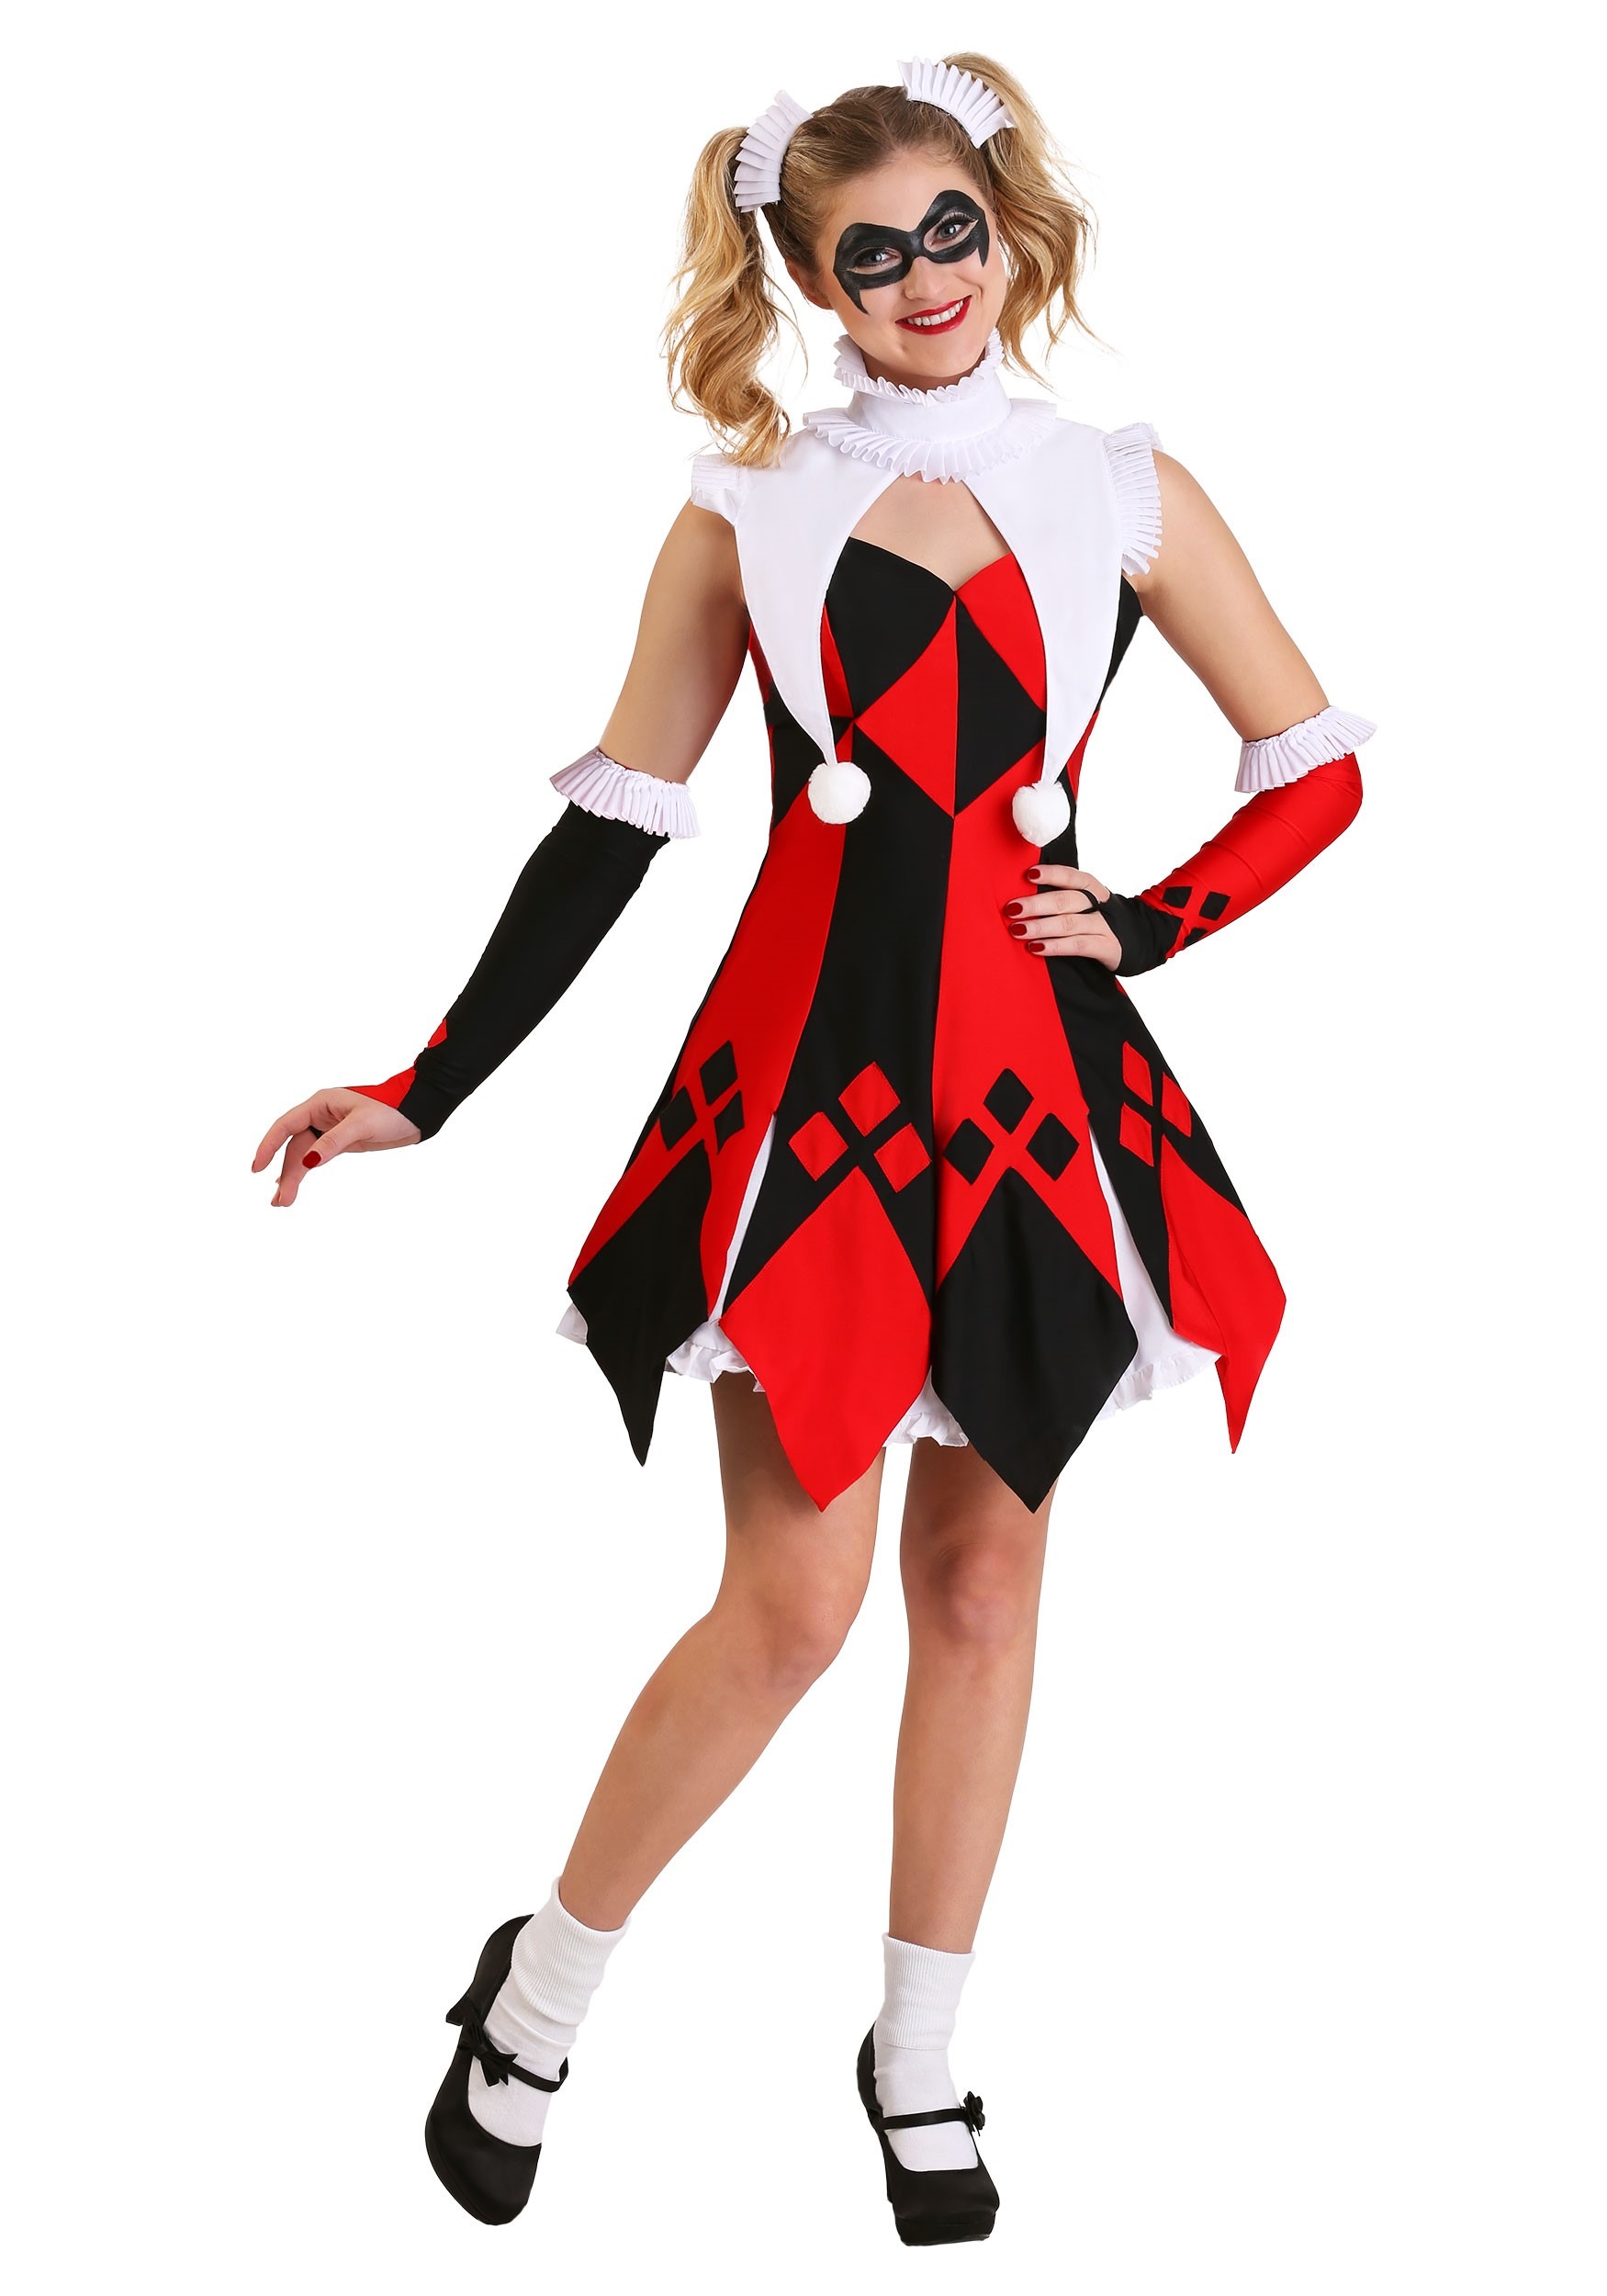 Photos - Fancy Dress FUN Costumes Cute Court Jester Costume for Women Black/Red/White F